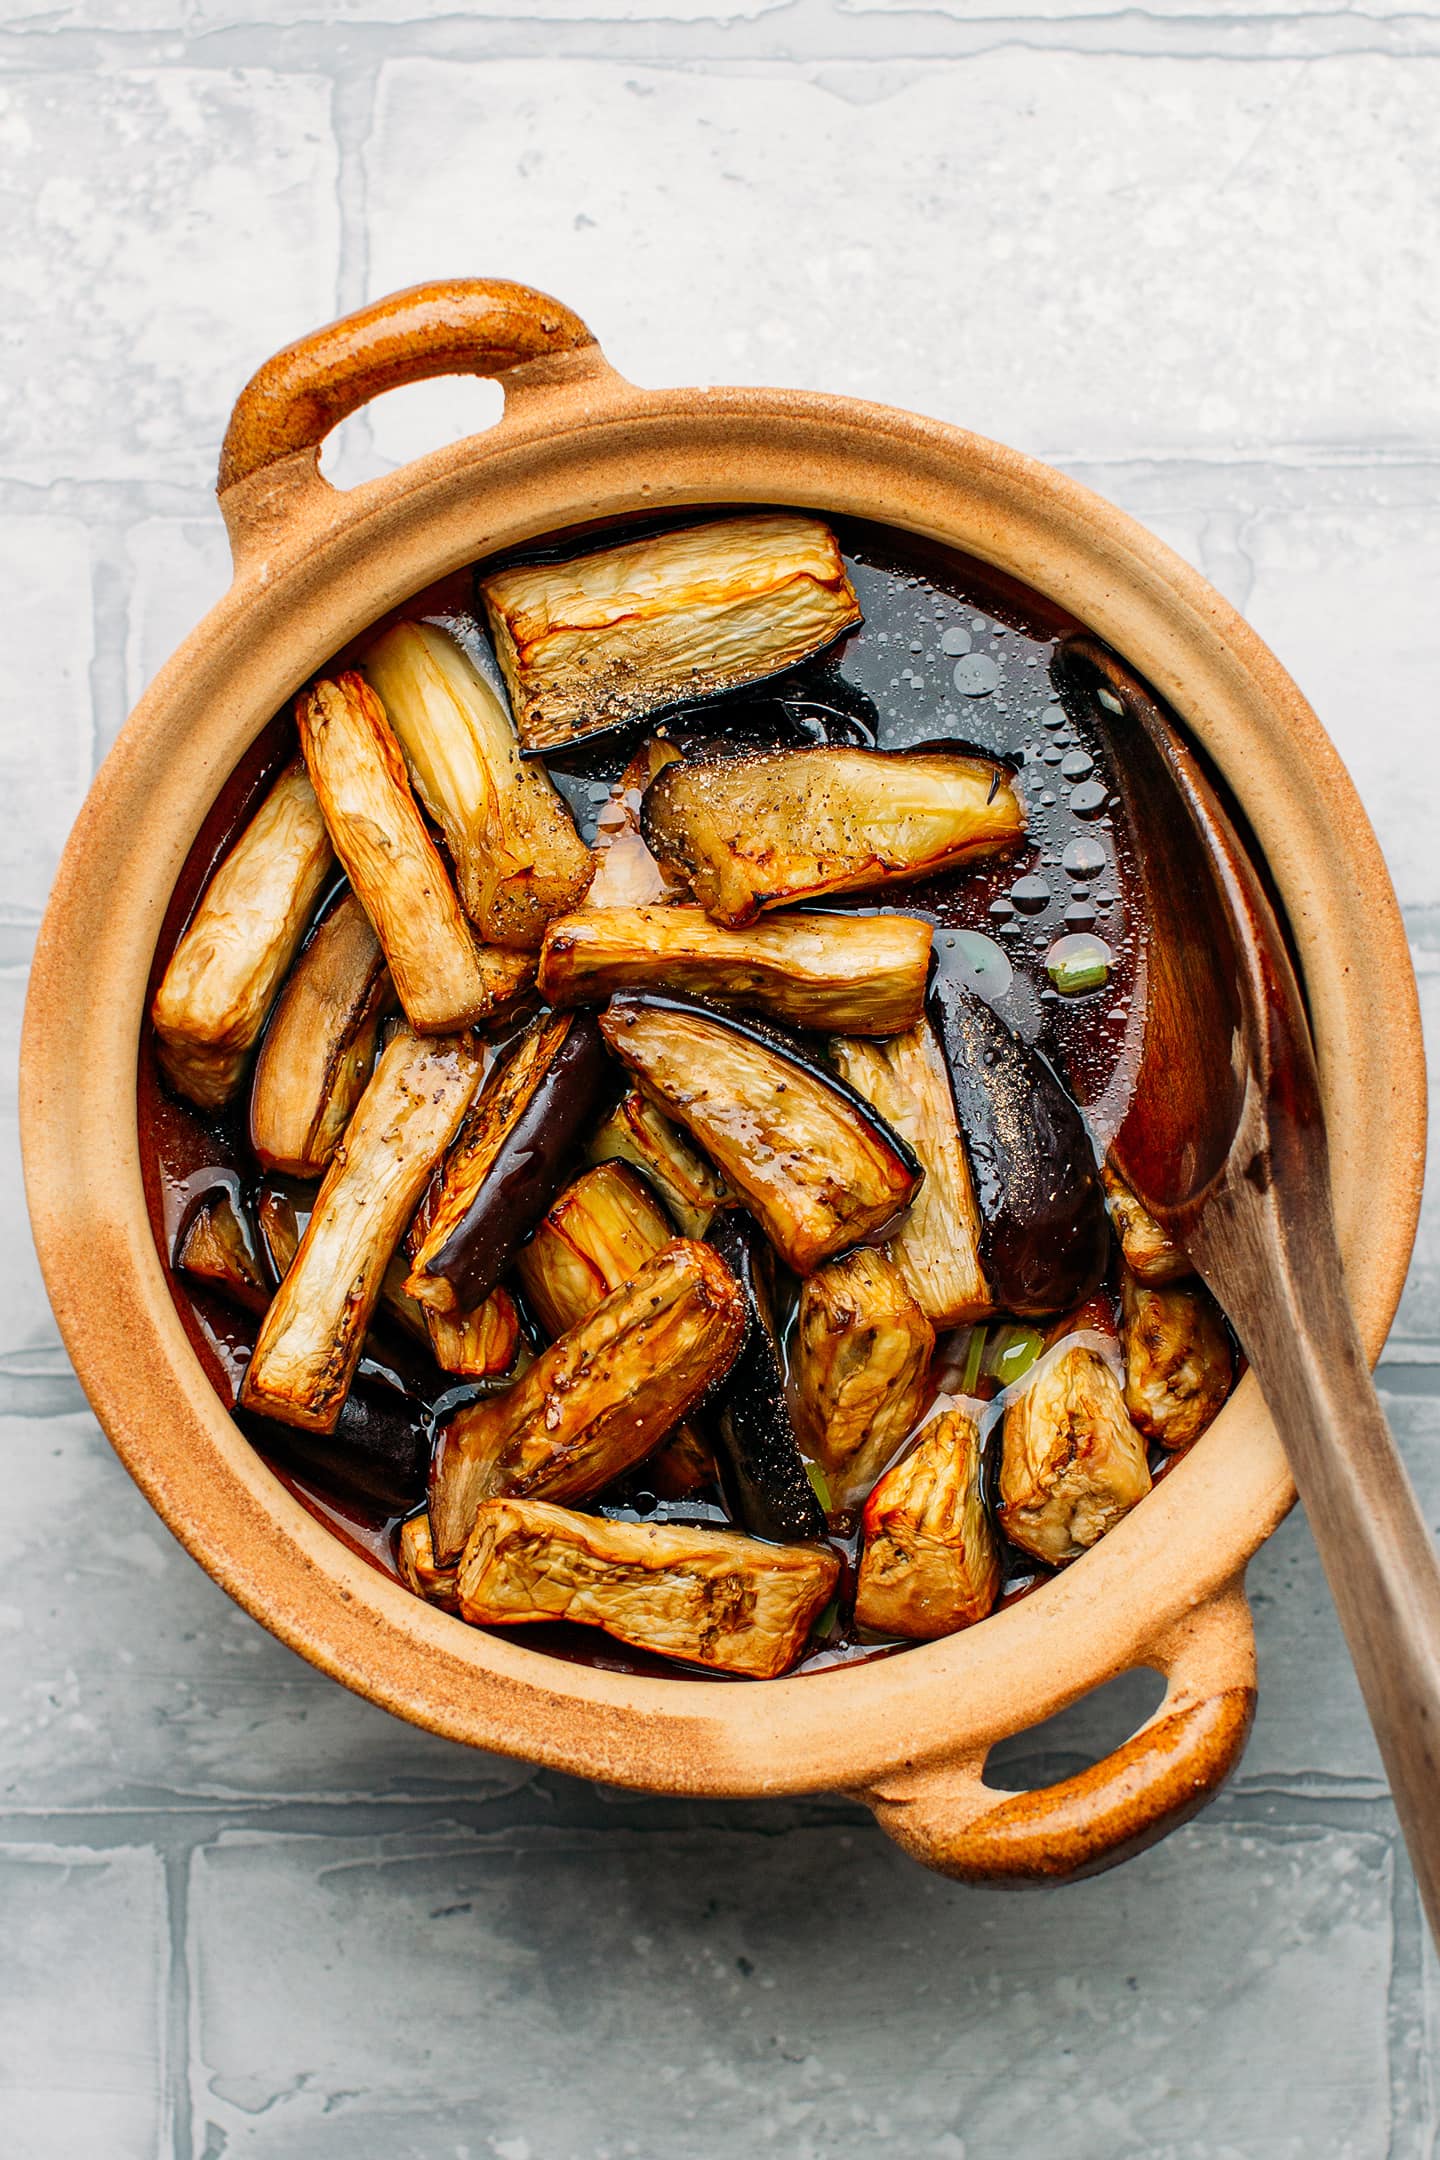 Roasted eggplants in a clay pot.